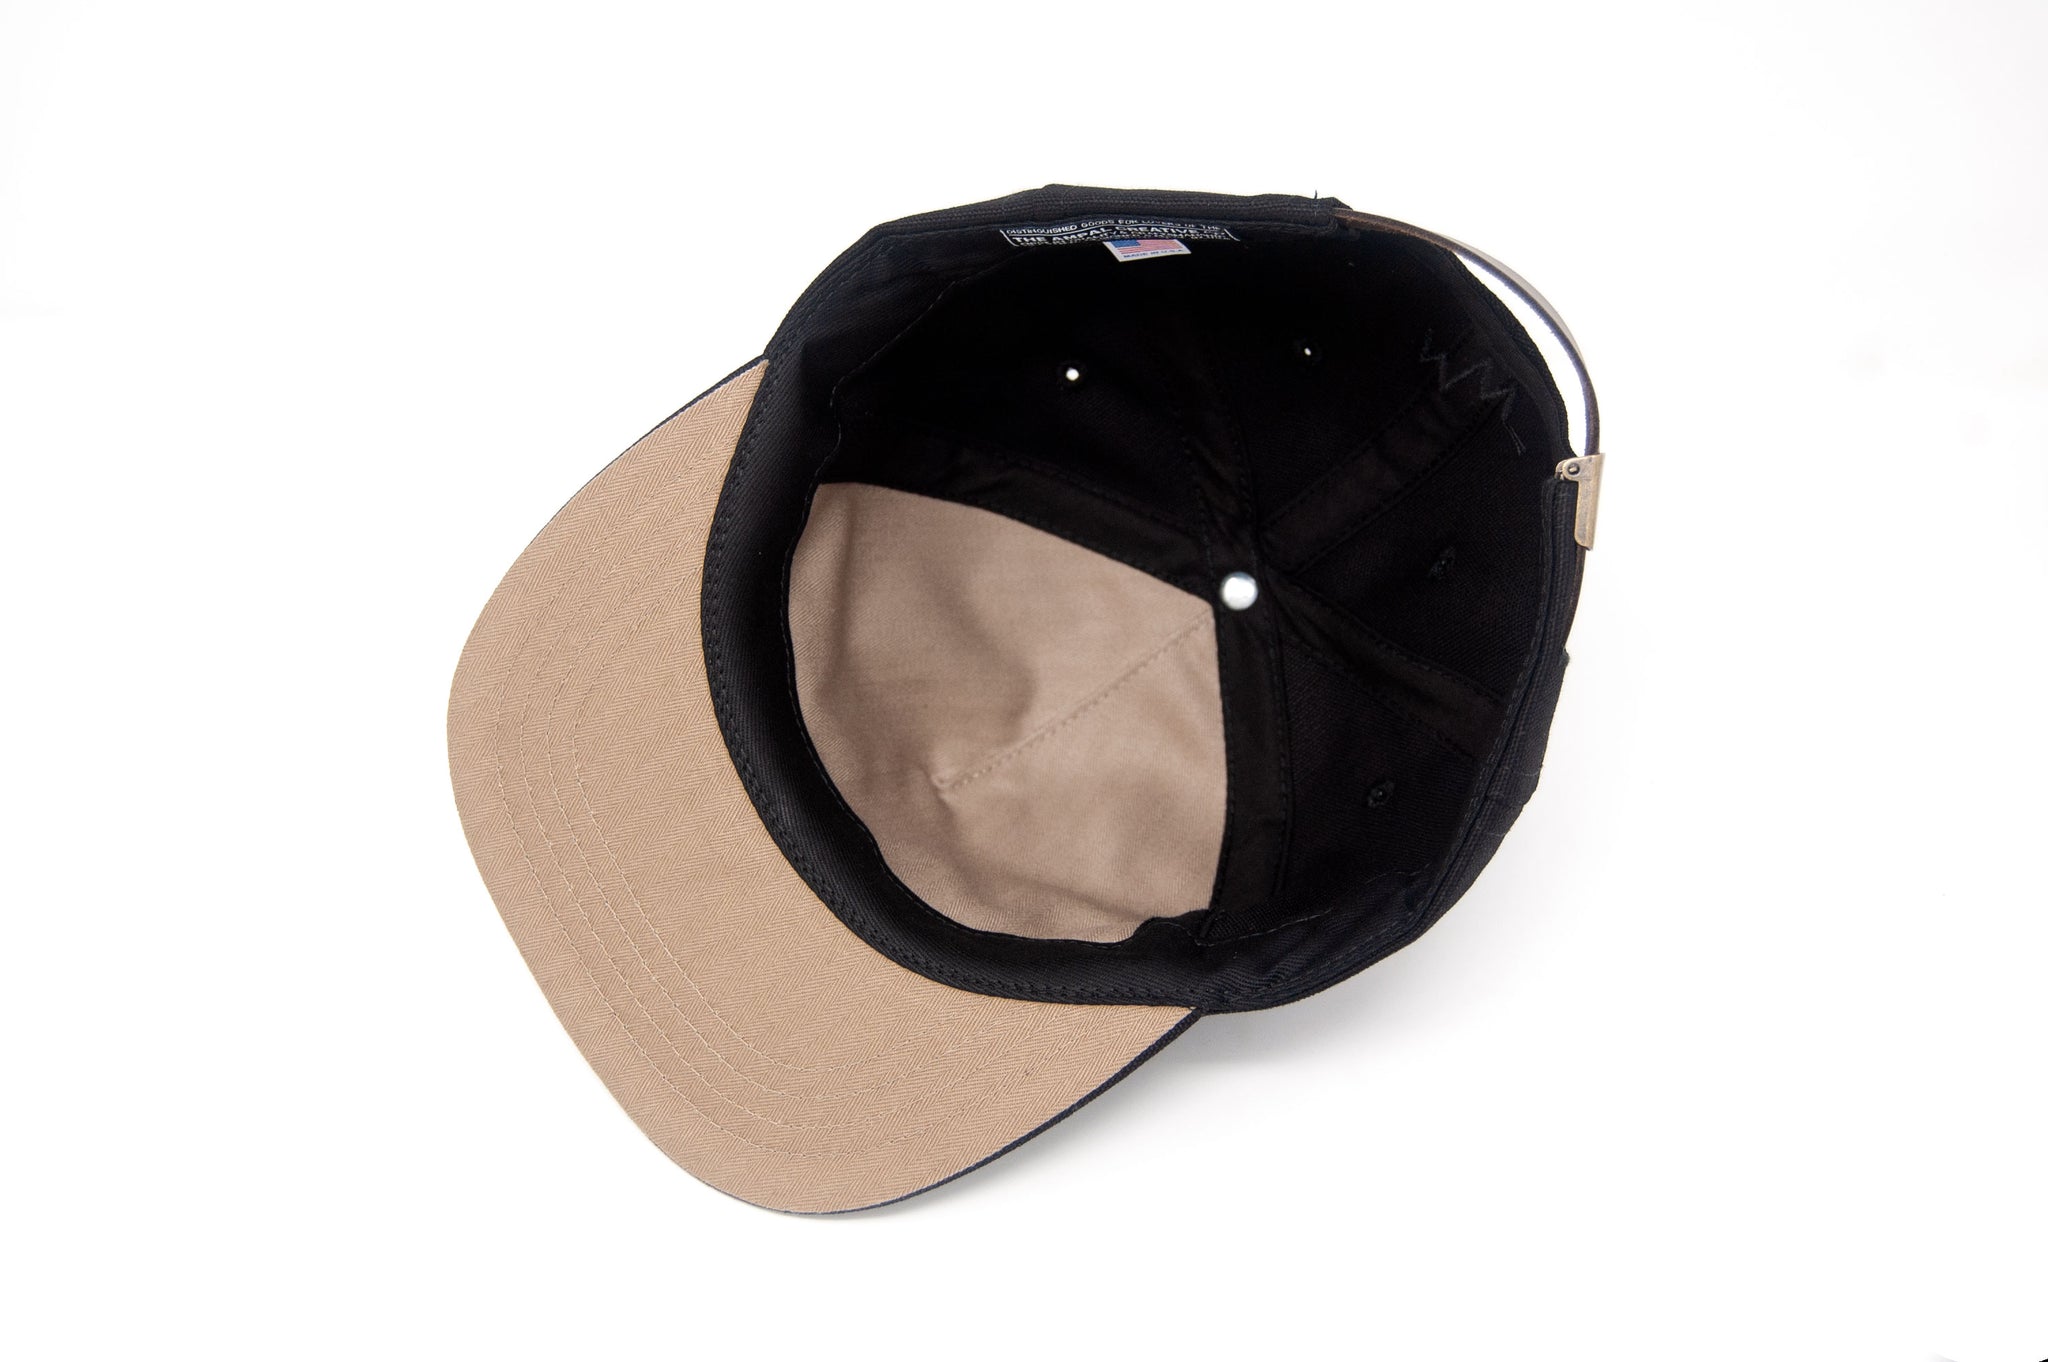 Ampal x MADEWEST "Flying Can" Strapback